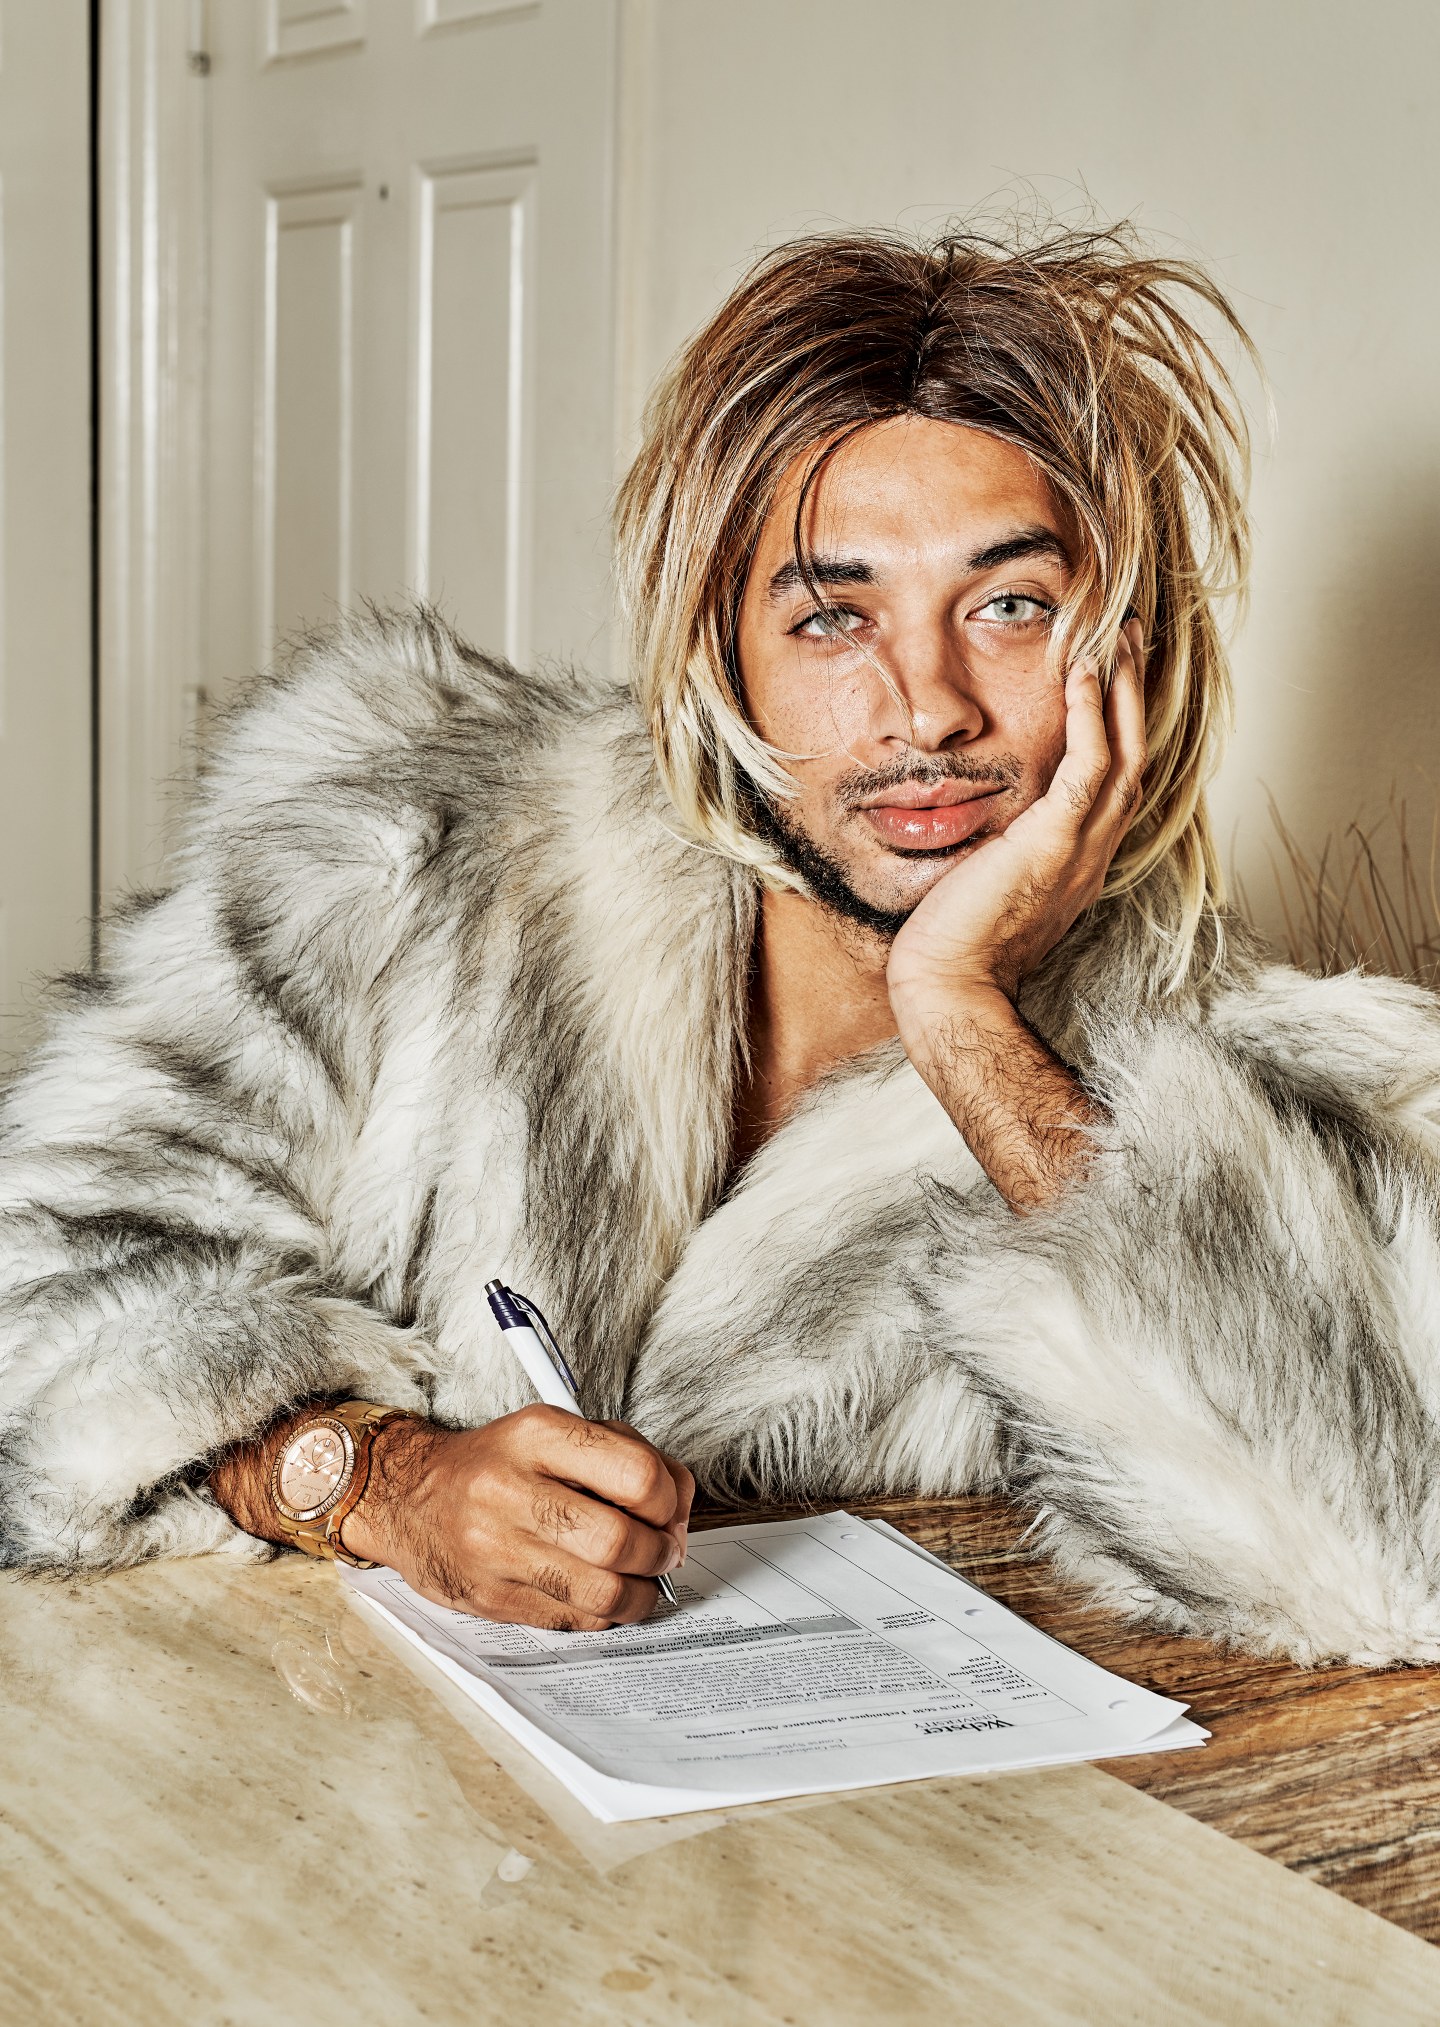 Joanne The Scammer Lives For Drama. Branden Miller Is Just Trying To Live. 